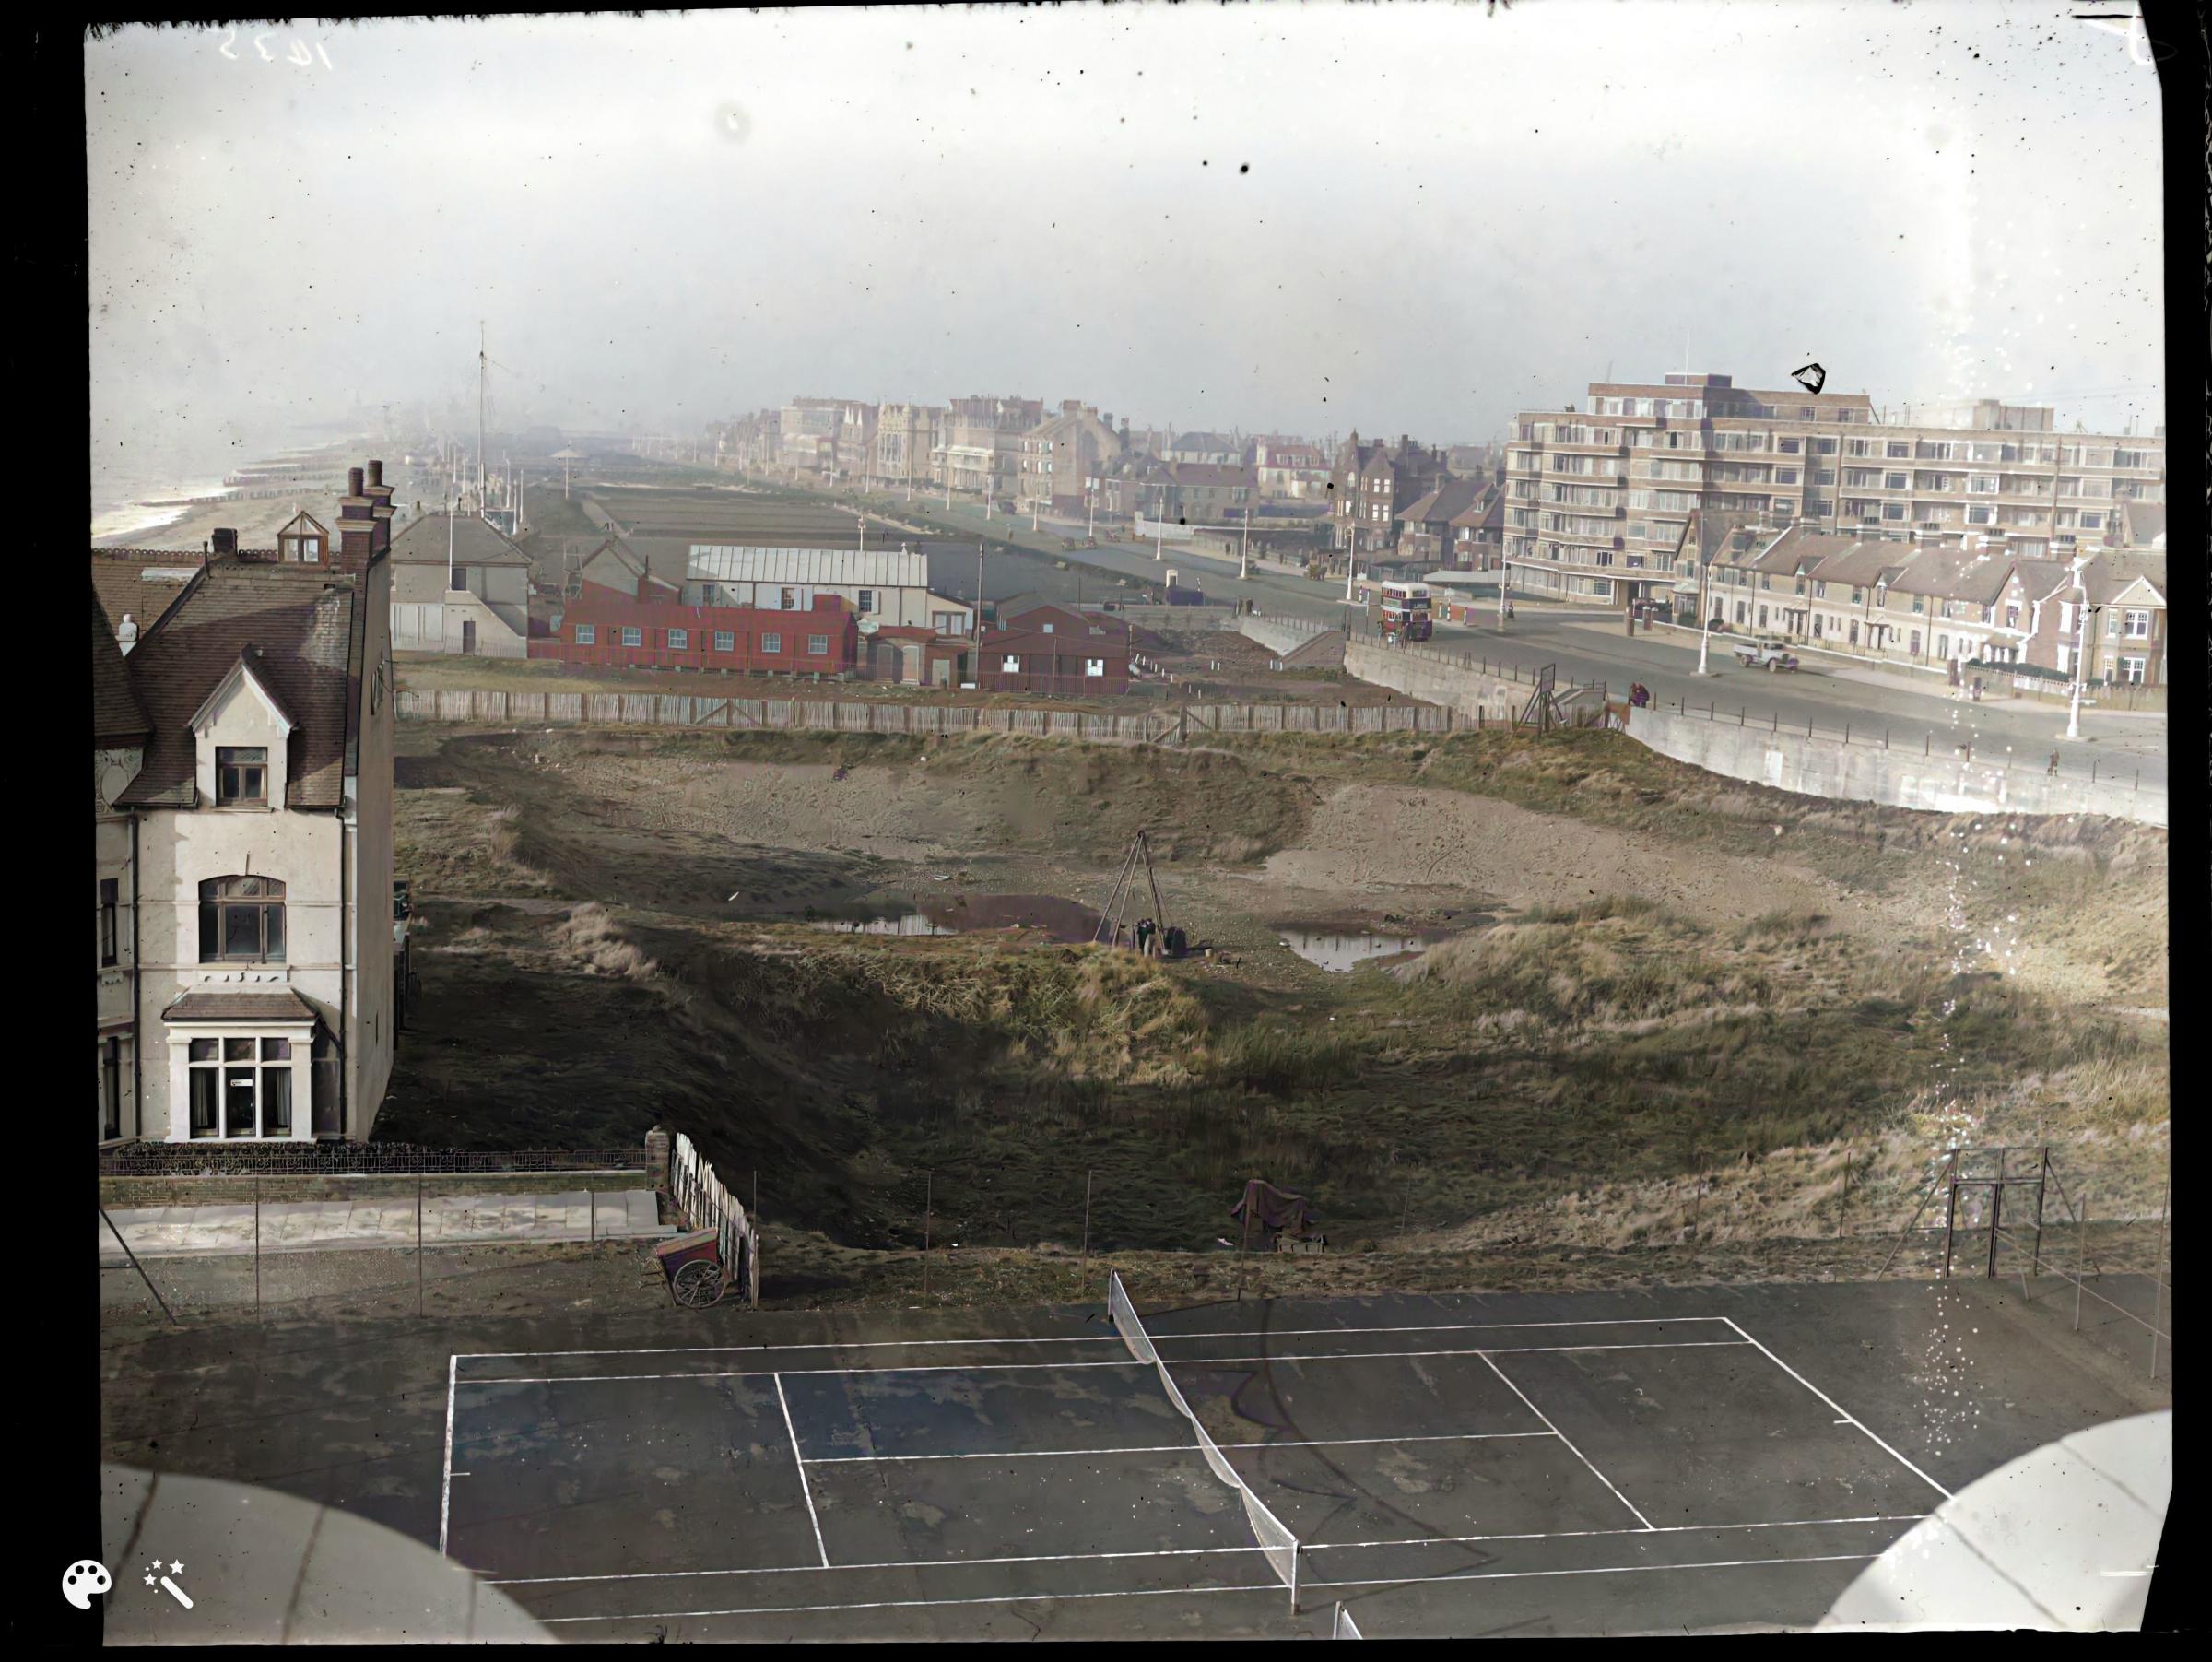 The King Alfred site in Hove in around 1936